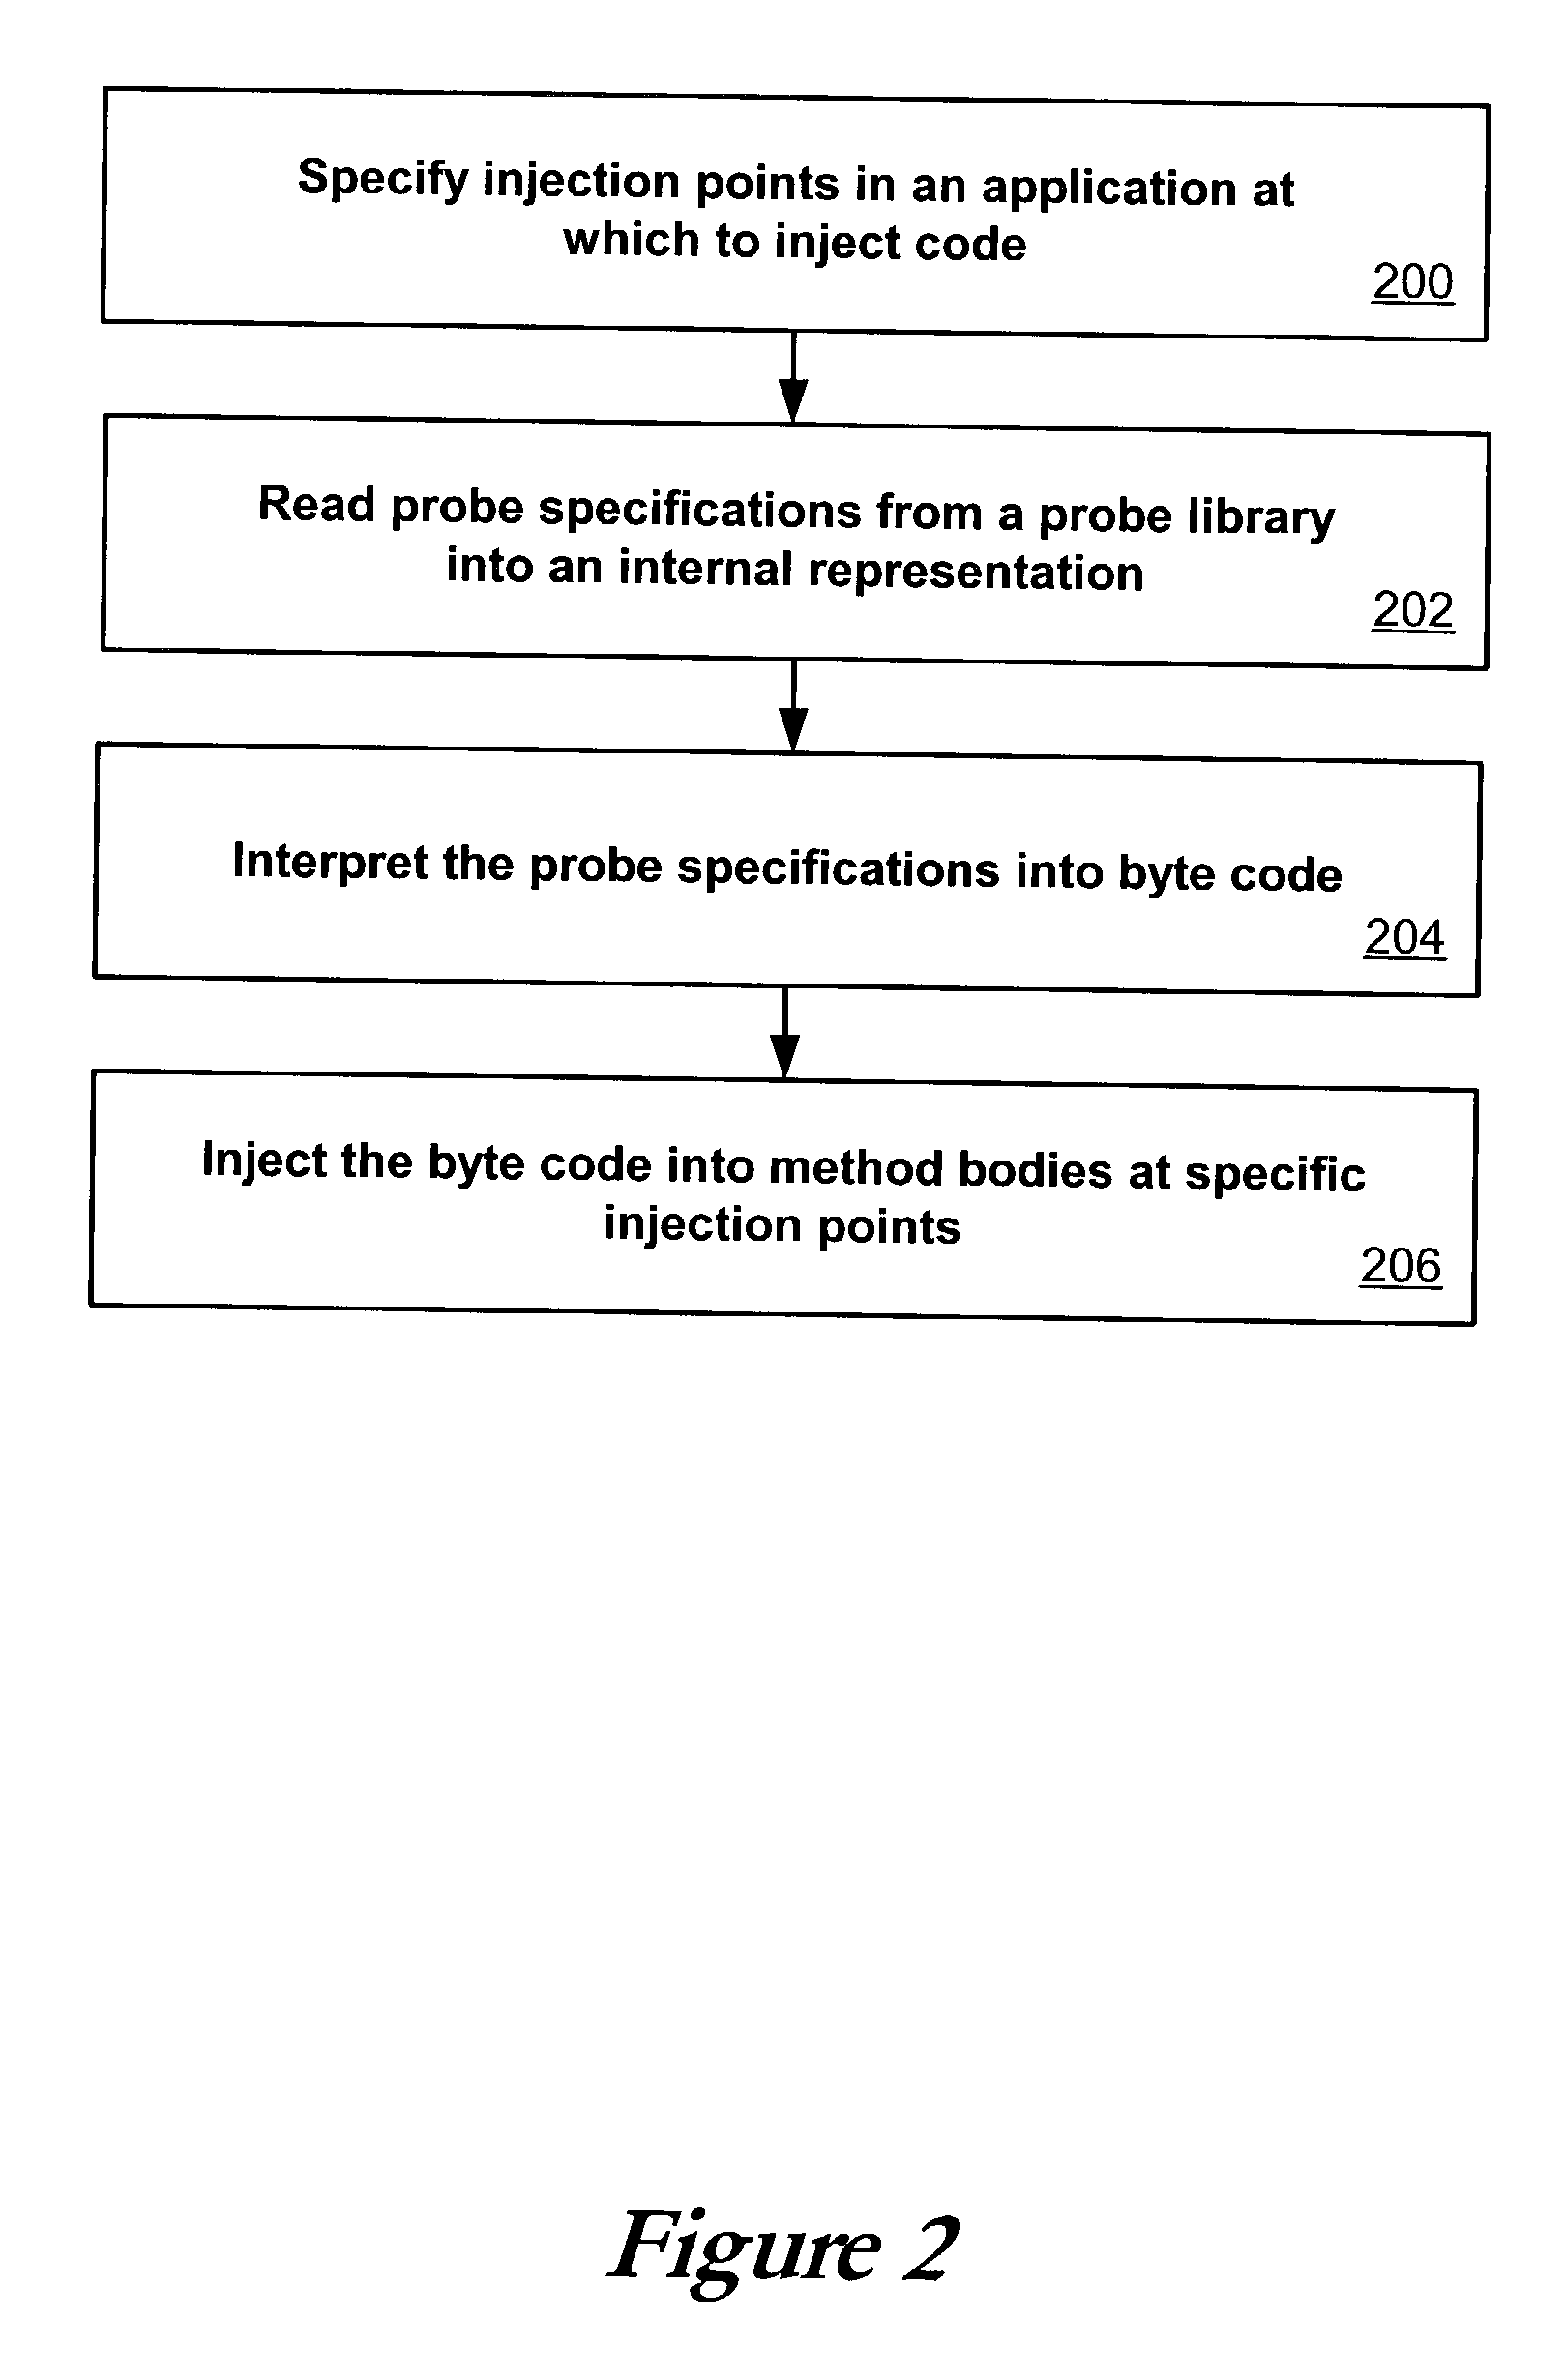 Flexible and extensible java bytecode instrumentation system